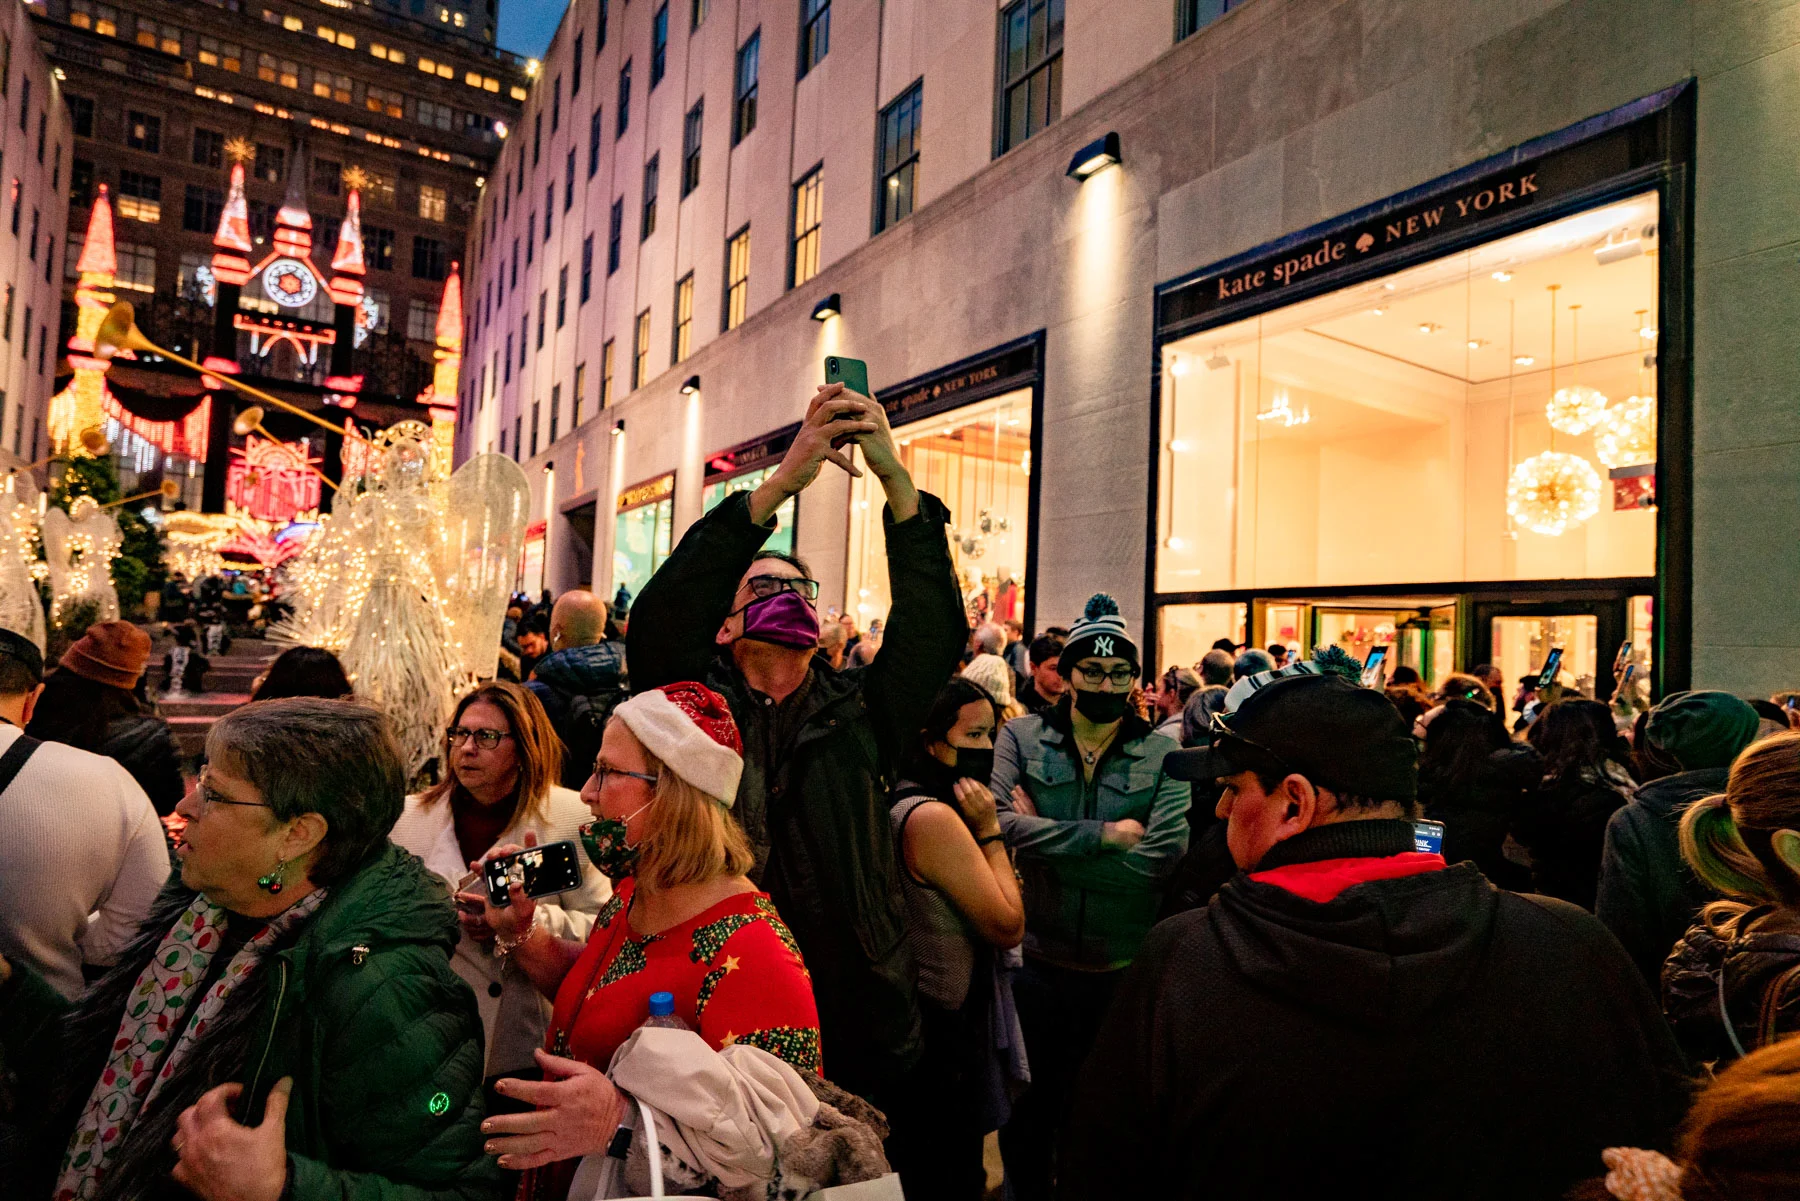 Why not to visit NYC during Thanksgiving, Crowds at Rockefeller Center